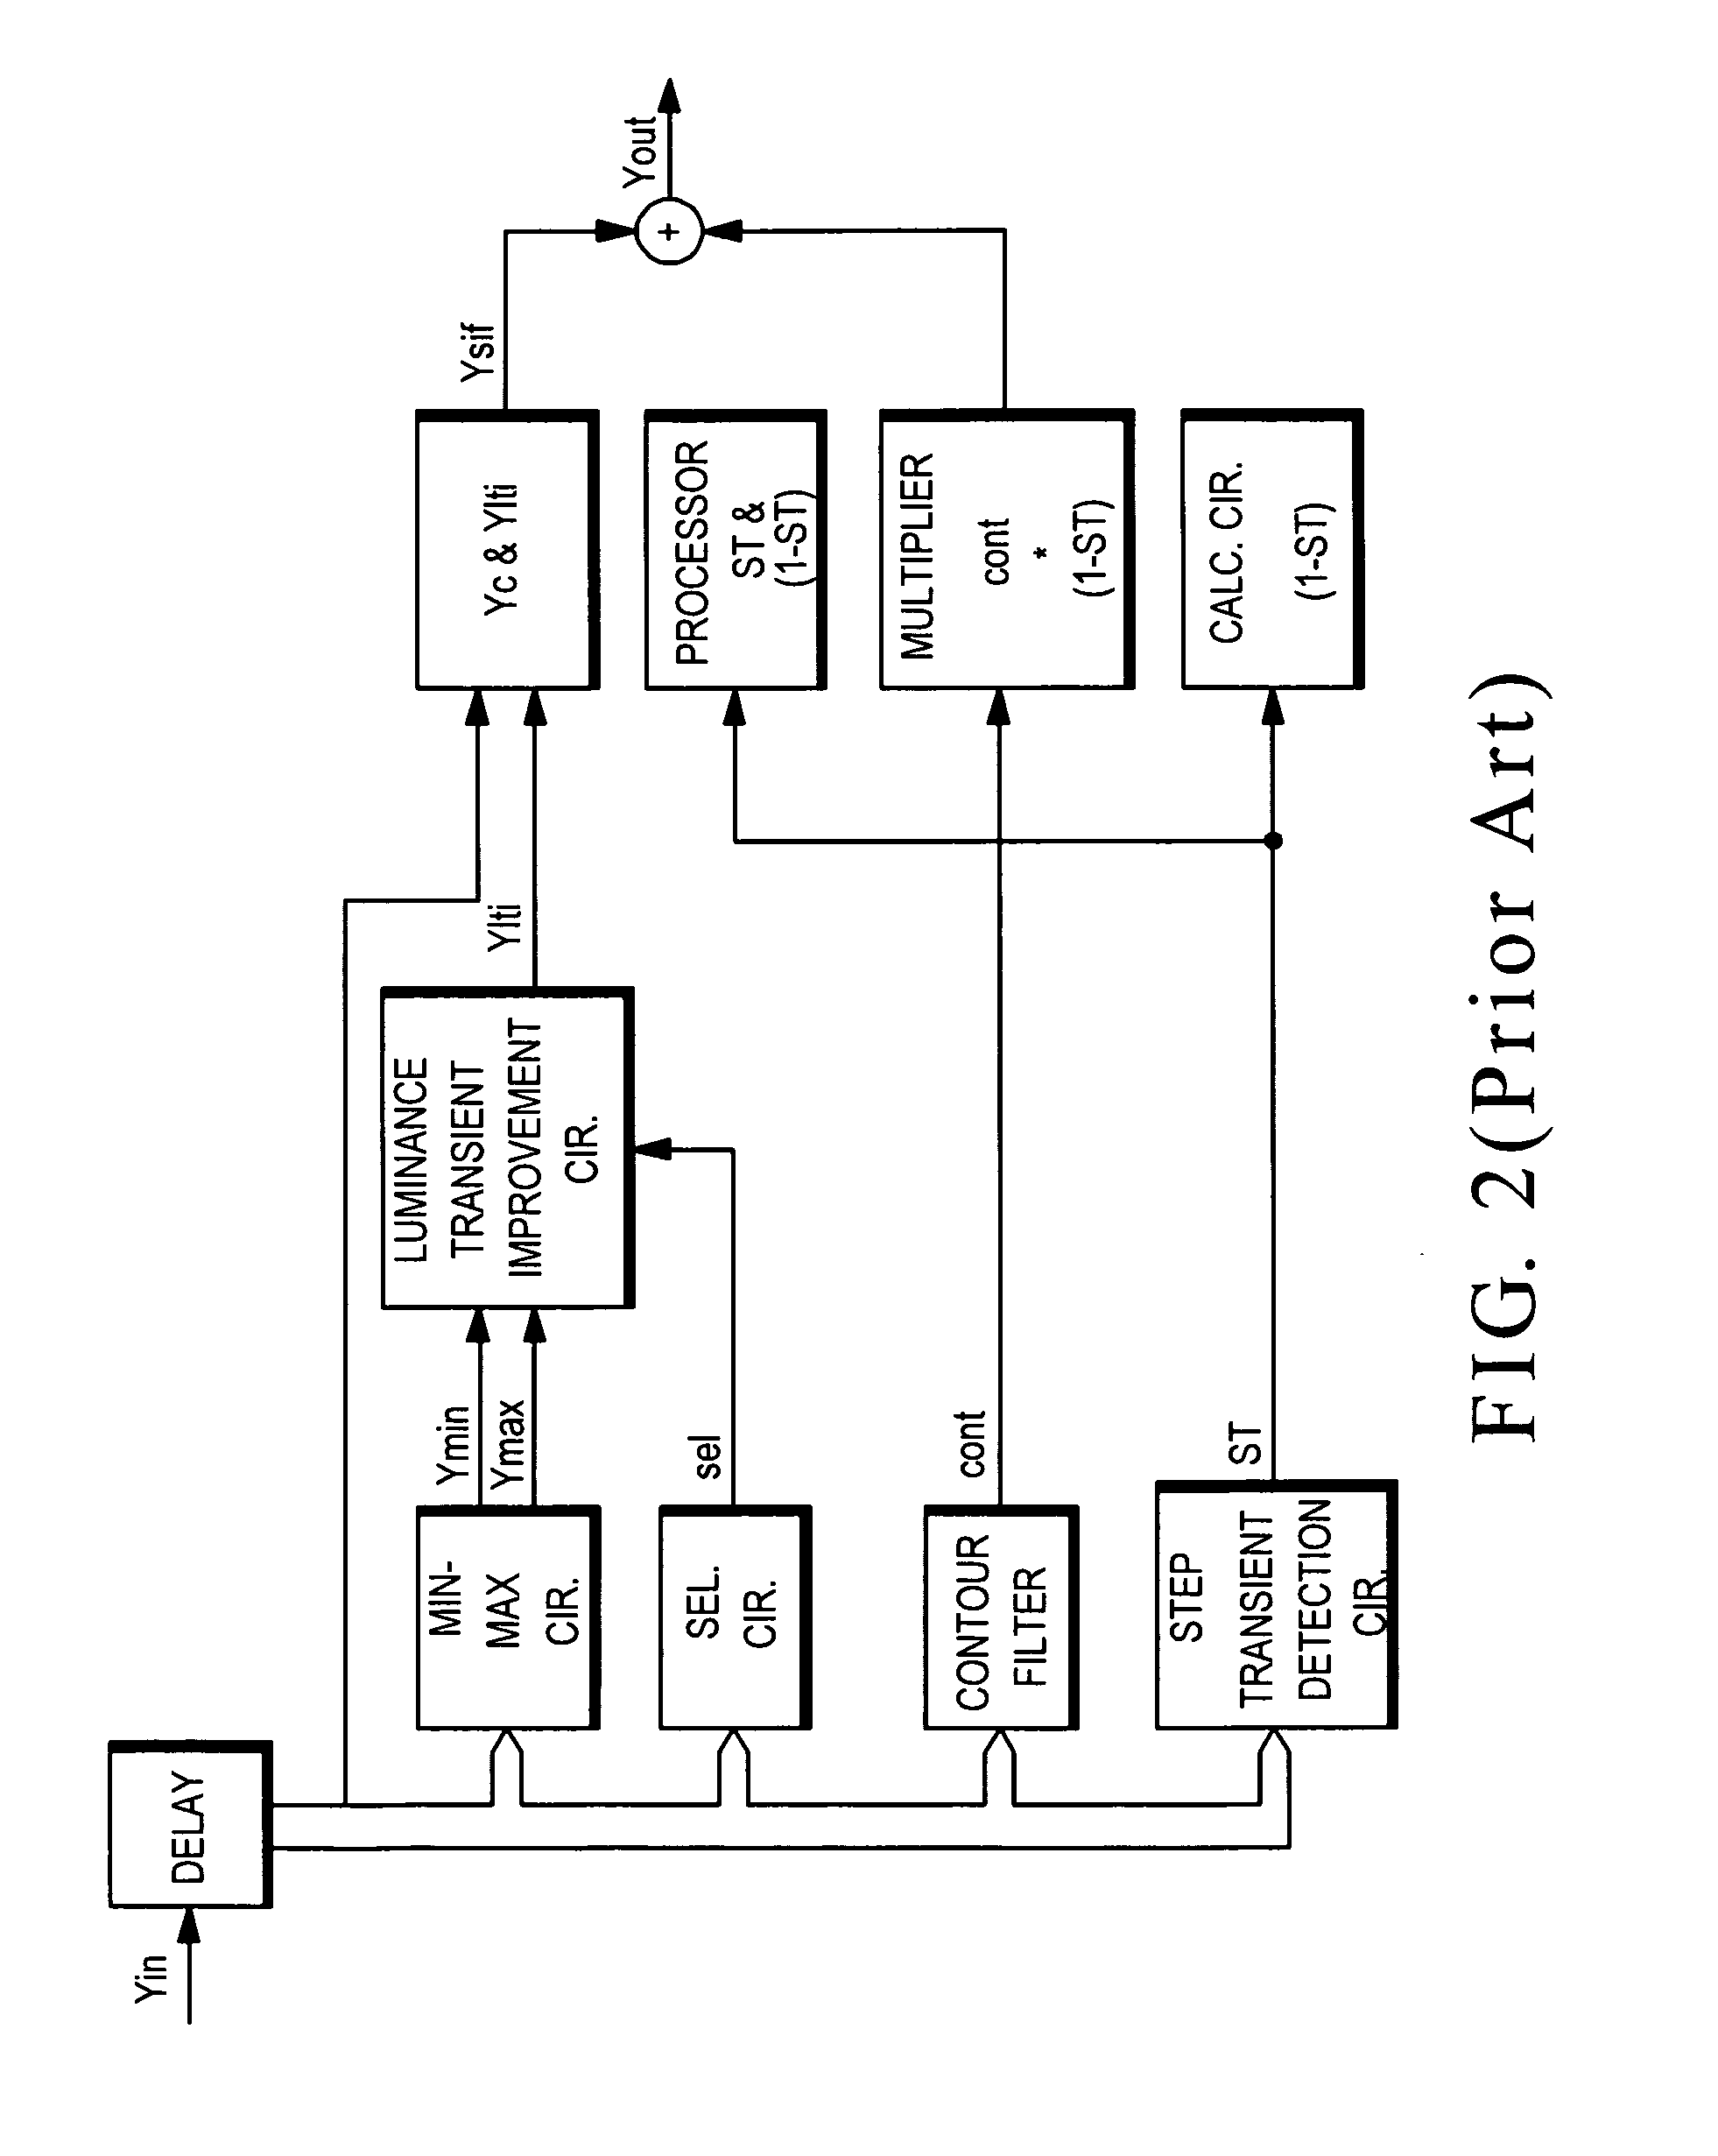 System for applying multi-direction and multi-slope region detection to image edge enhancement